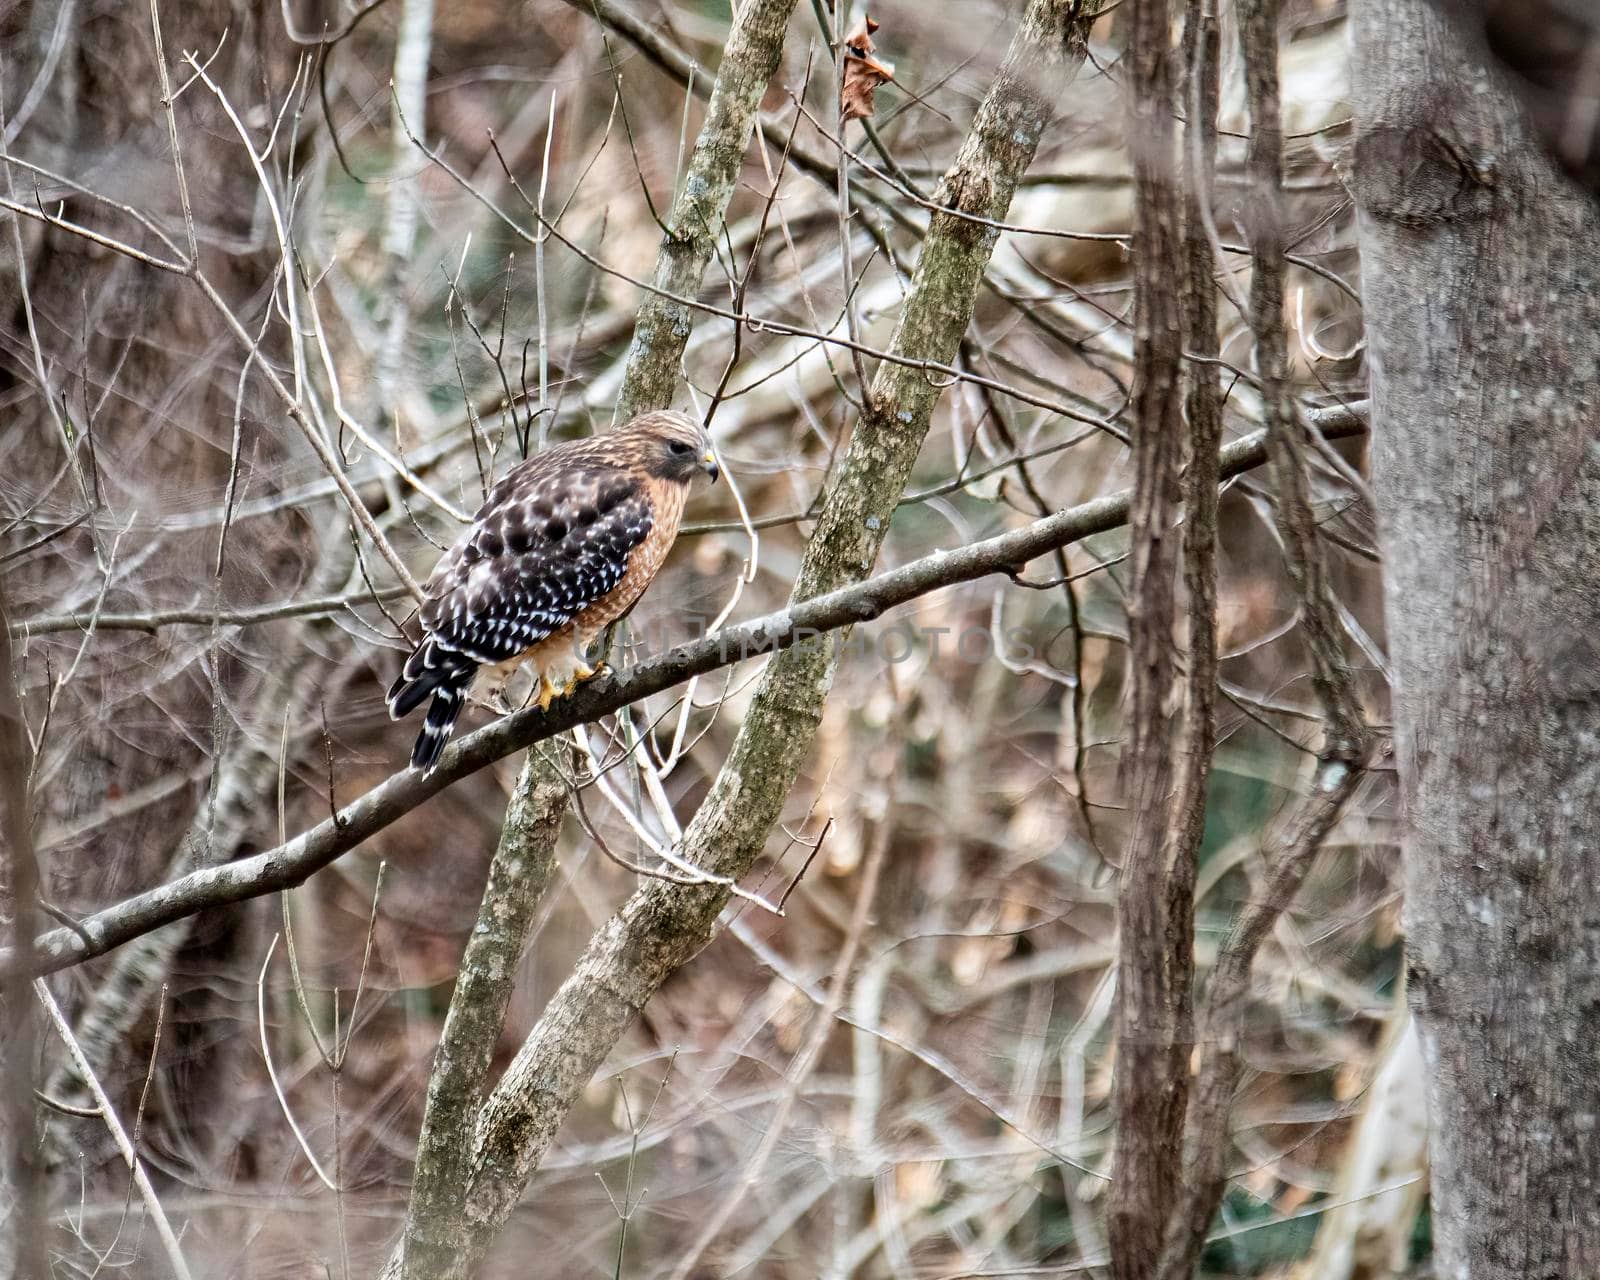 Red-shouldered hawk perch on a limb in a woodland area.